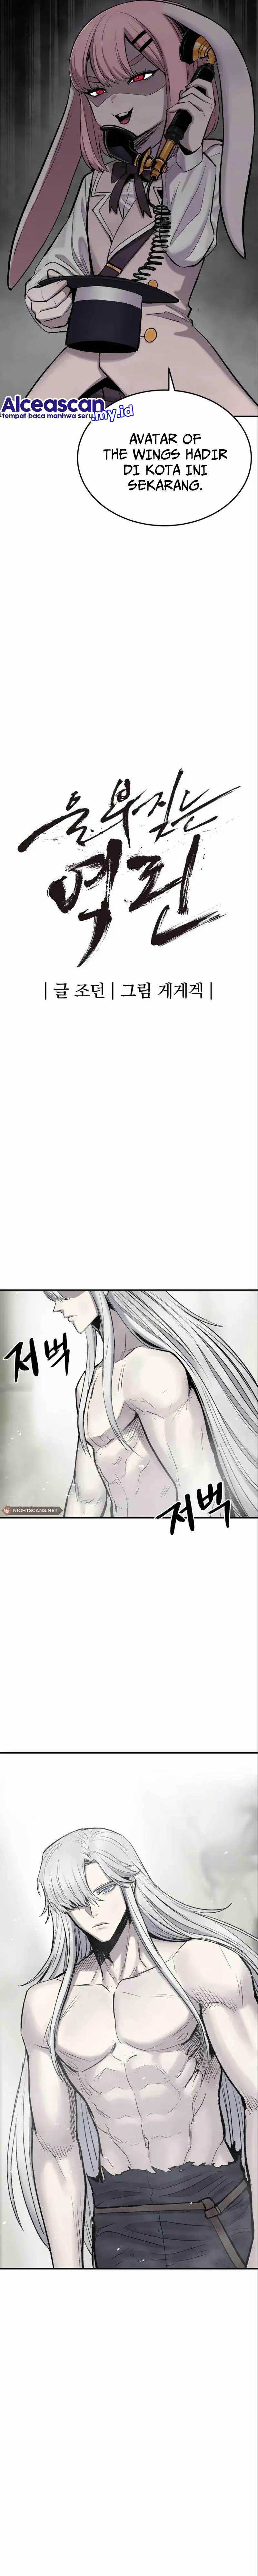 Howling Dragon (The Wailing Perversion) Chapter 09